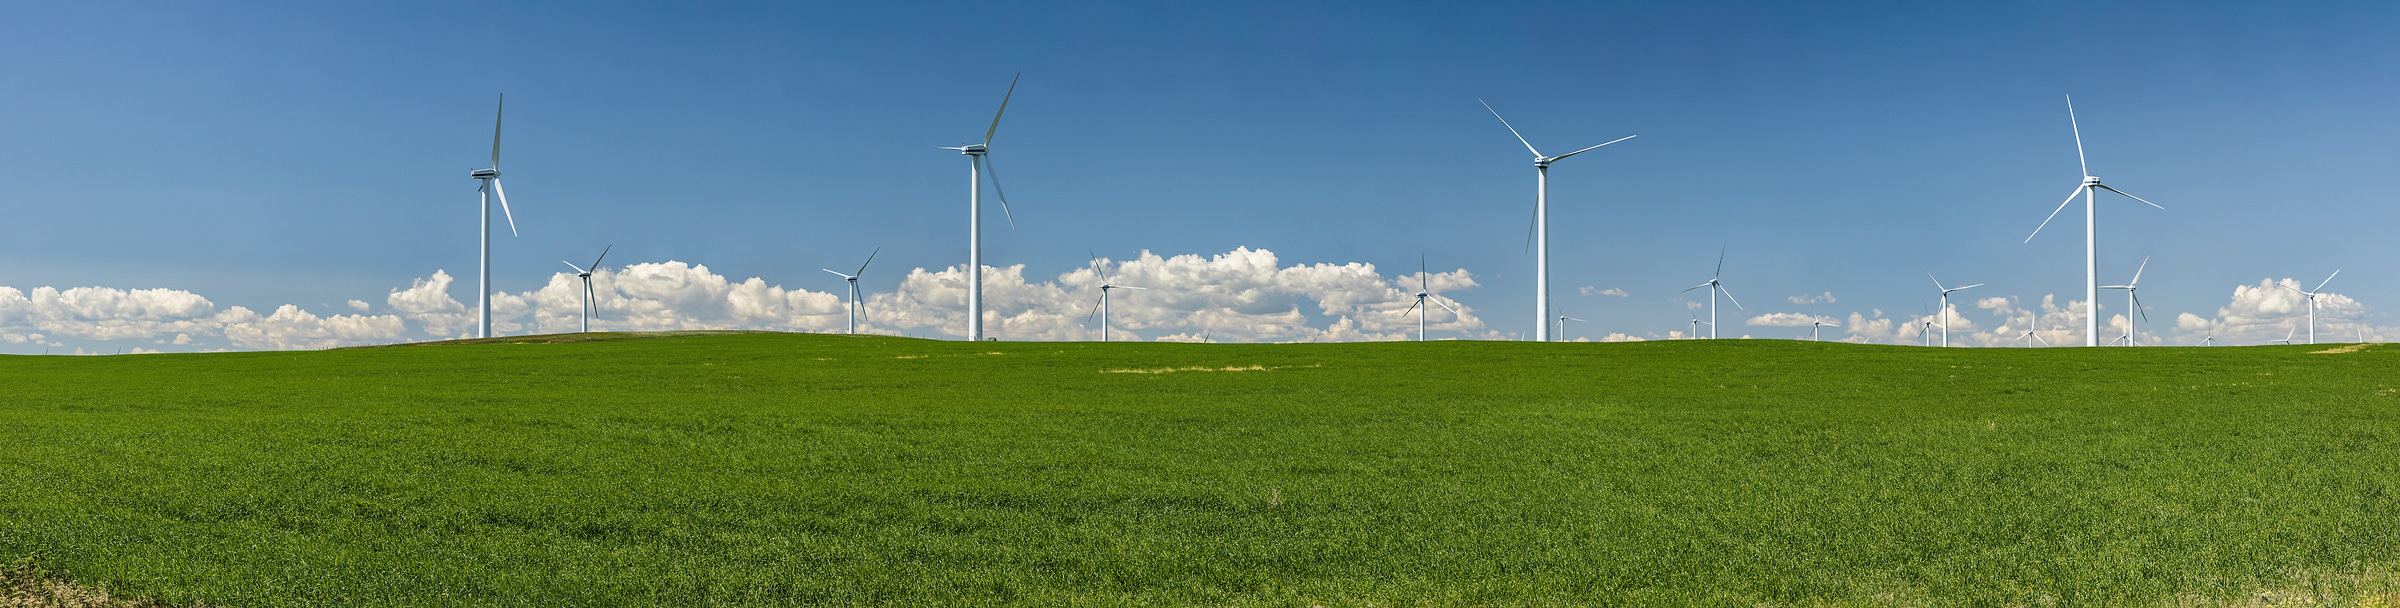 704 megapixels! A very high resolution, large-format VAST photo of wind turbines on a grassy hill with a blue sky; green energy photograph created by Scott Dimond in Fort Macleod, Alberta, Canada